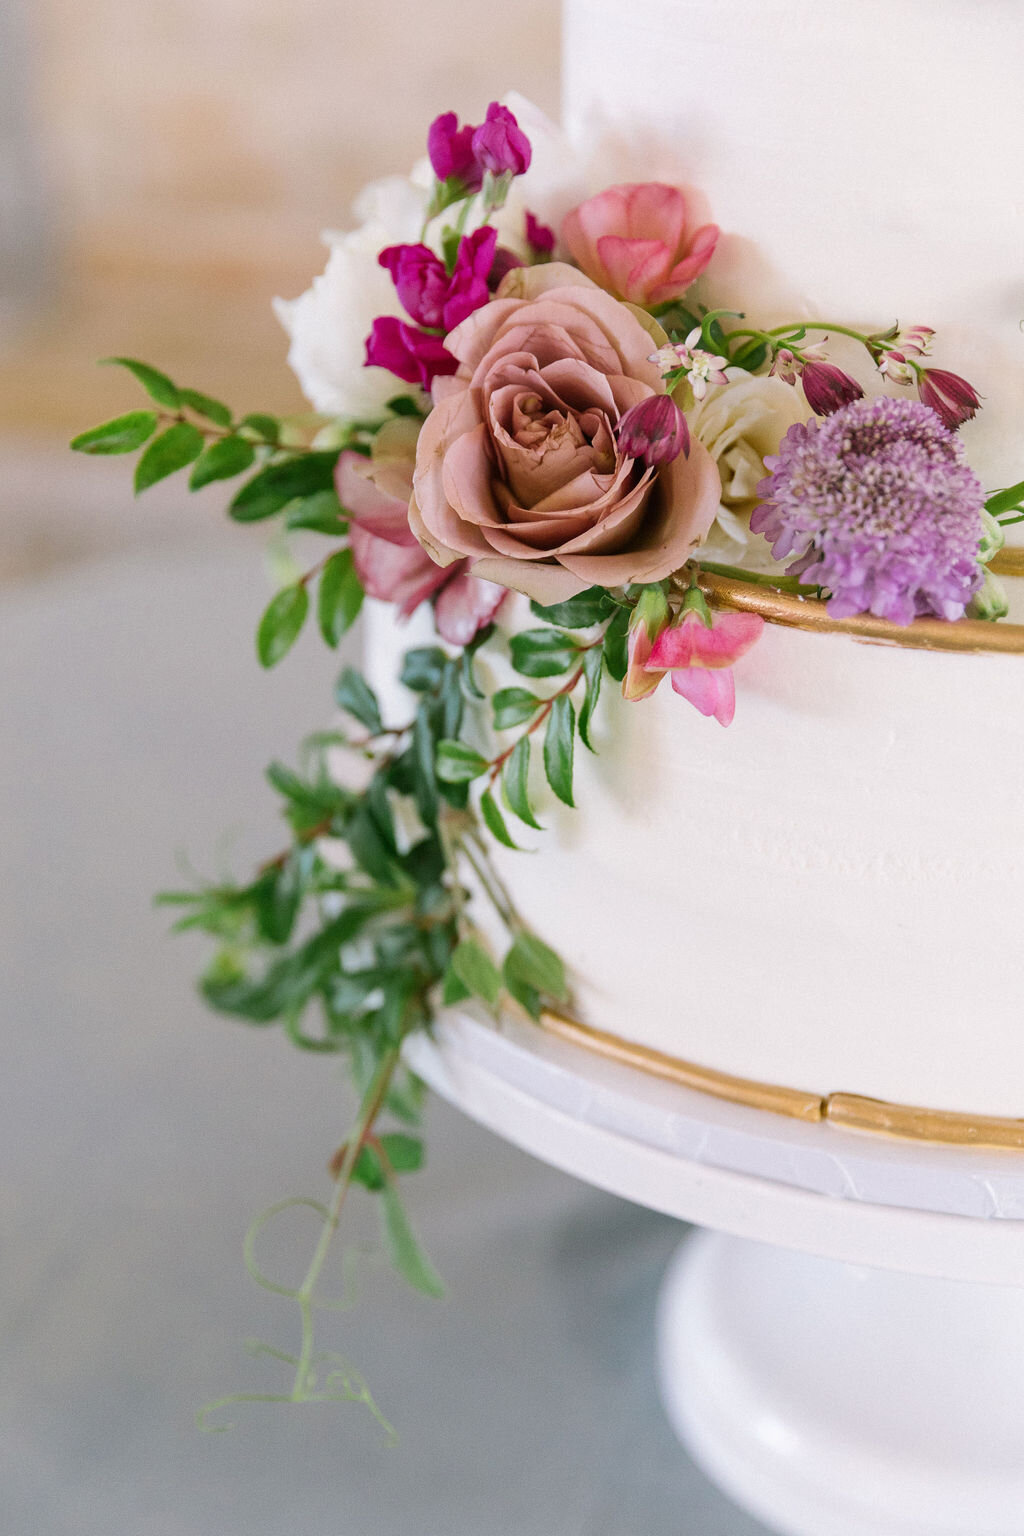 White cake with a copper rim and pink and purple flowers